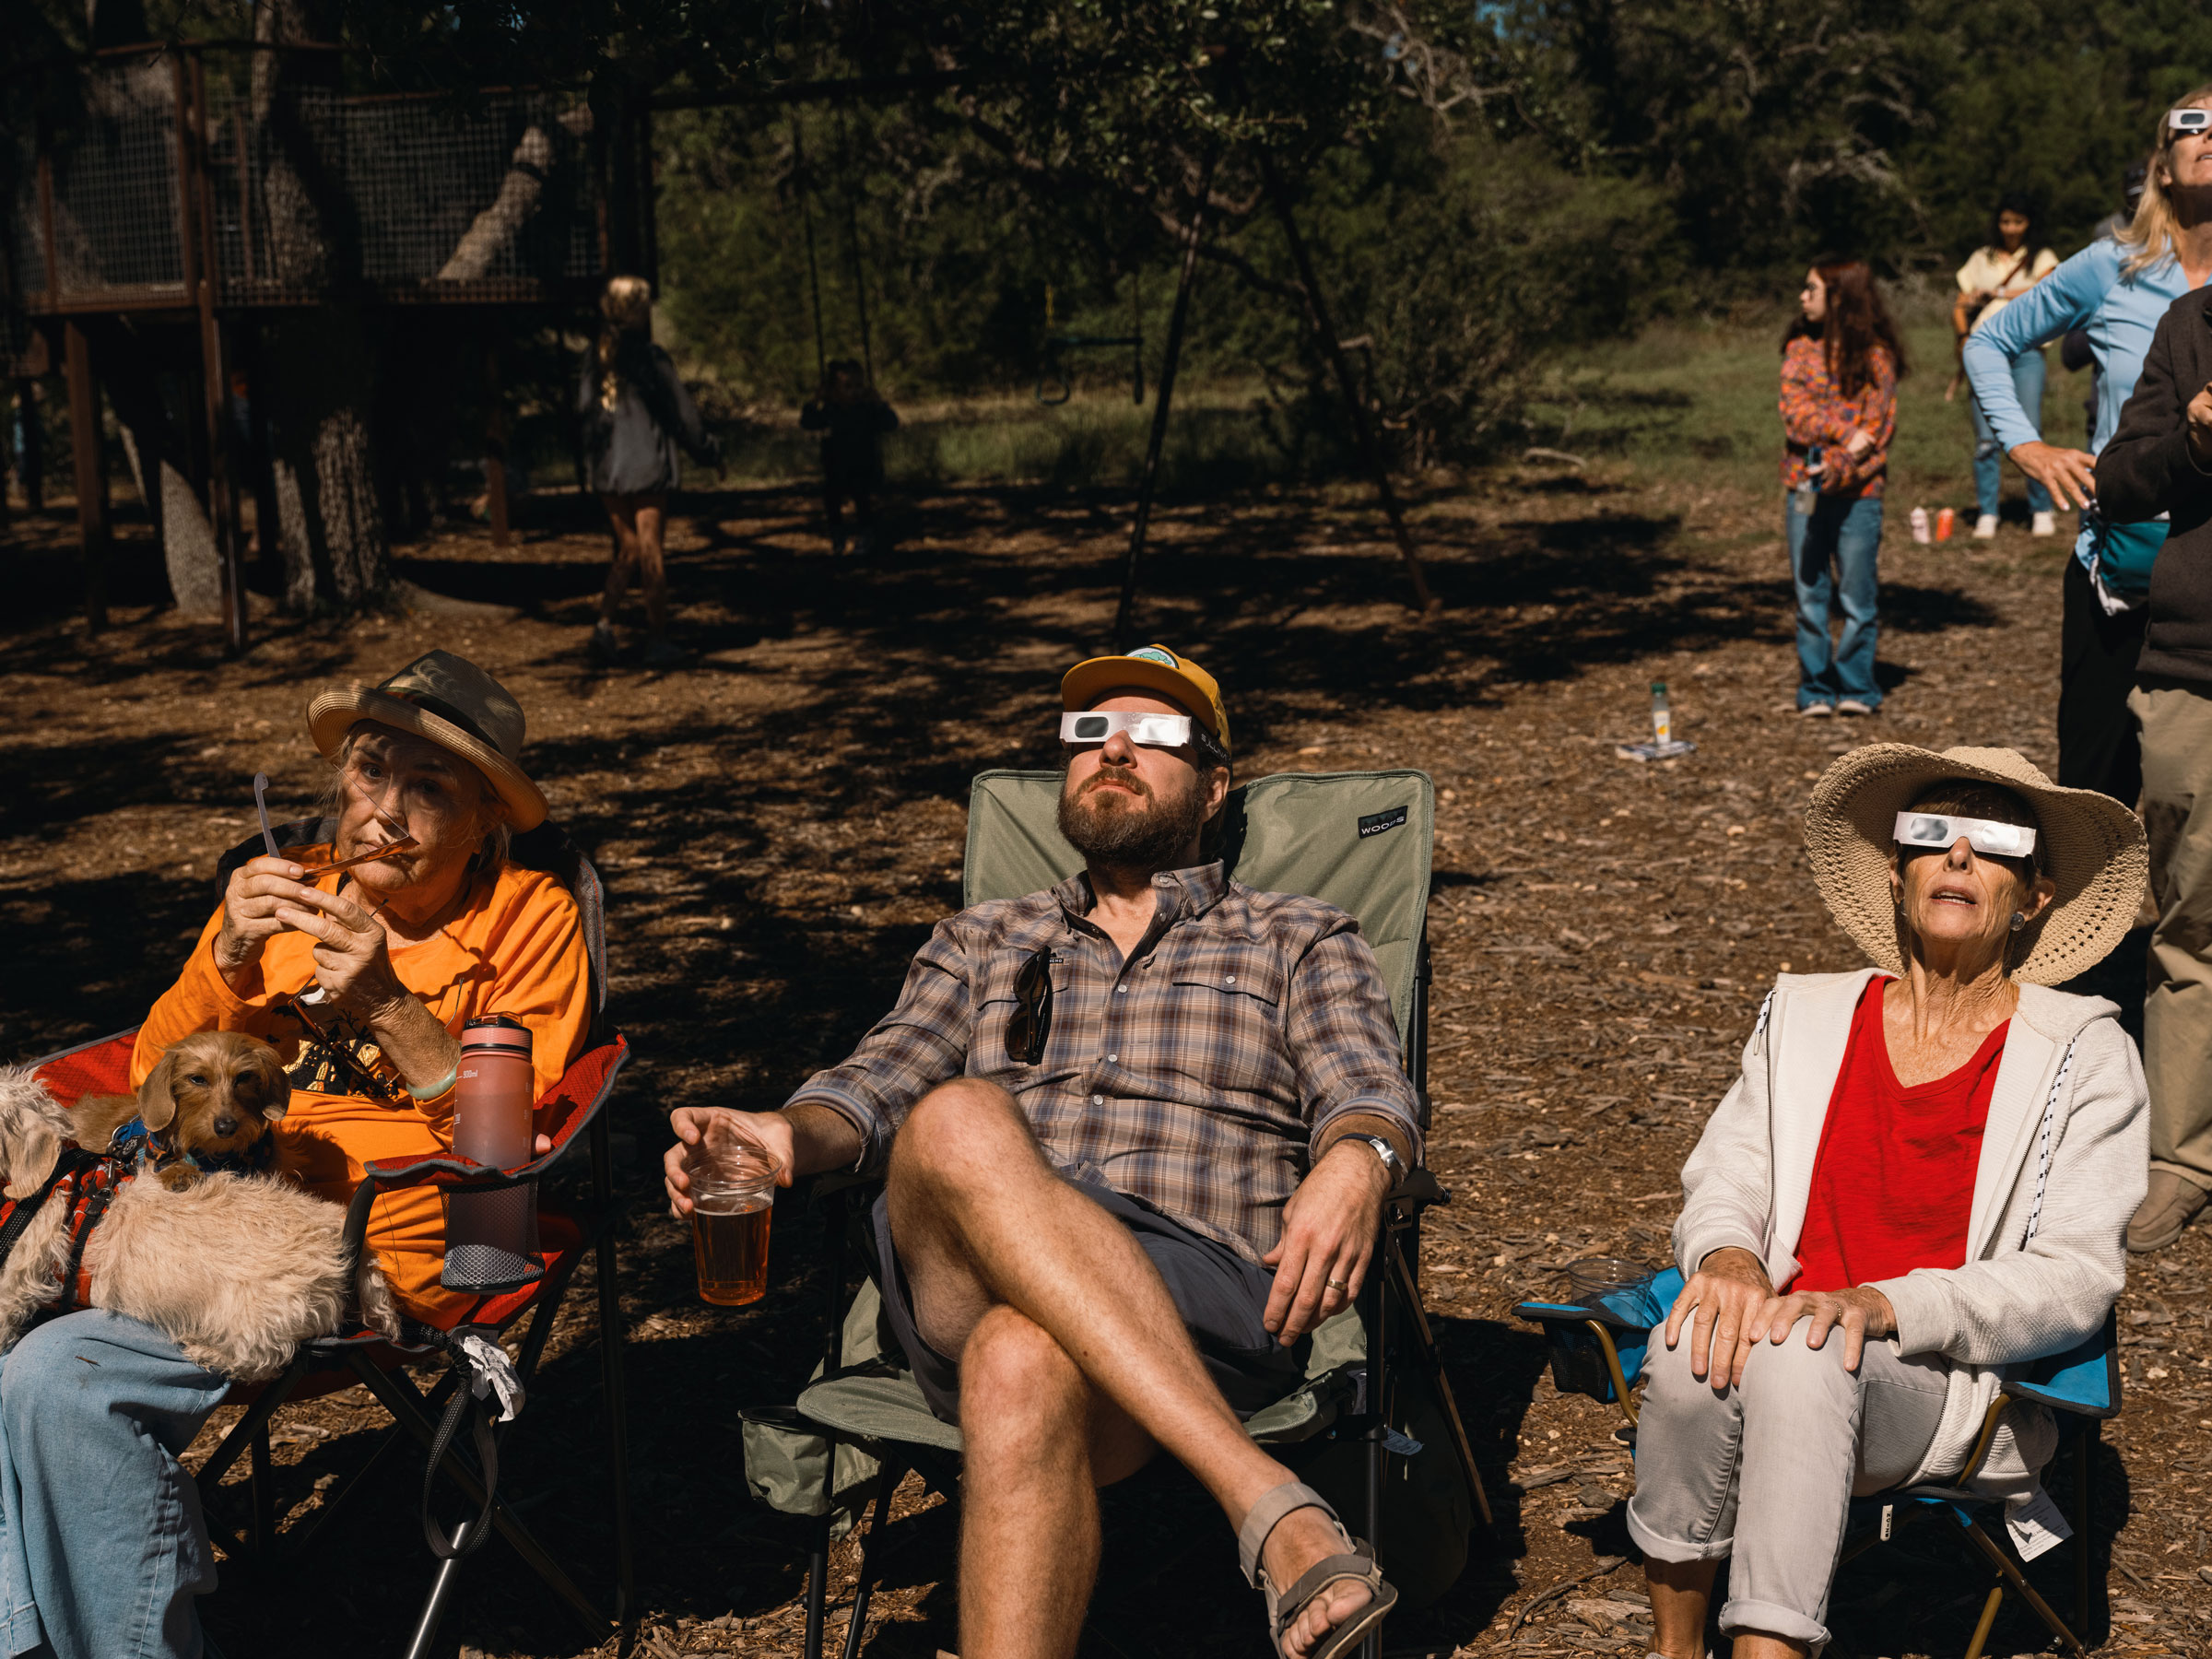 Spectators wear solar viewing glasses during a solar eclipse in Driftwood, Texas, on Oct. 14, 2023.